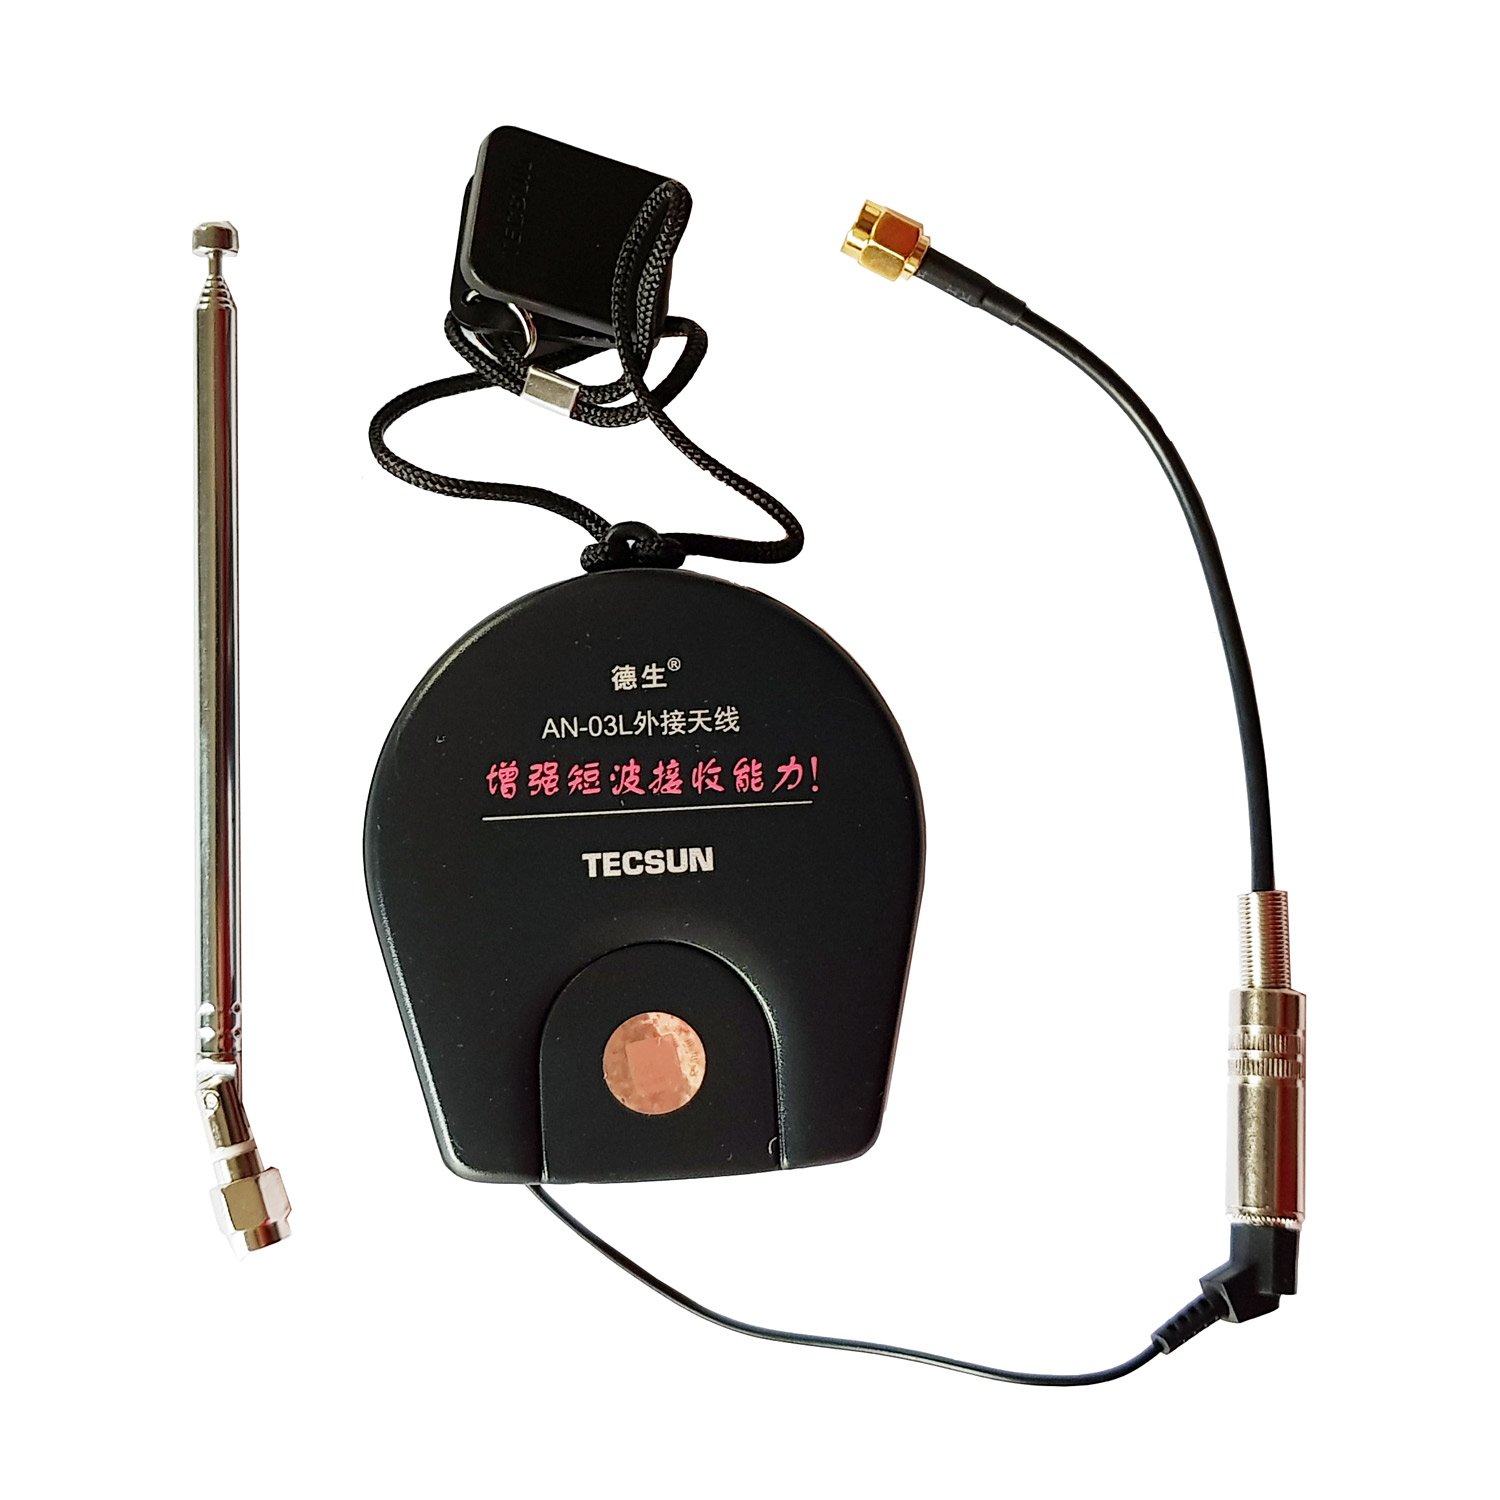 Book Cover Portable Antenna Bundle with 7M HF Antenna Spool, SMA Adapter and Telescopic Whip